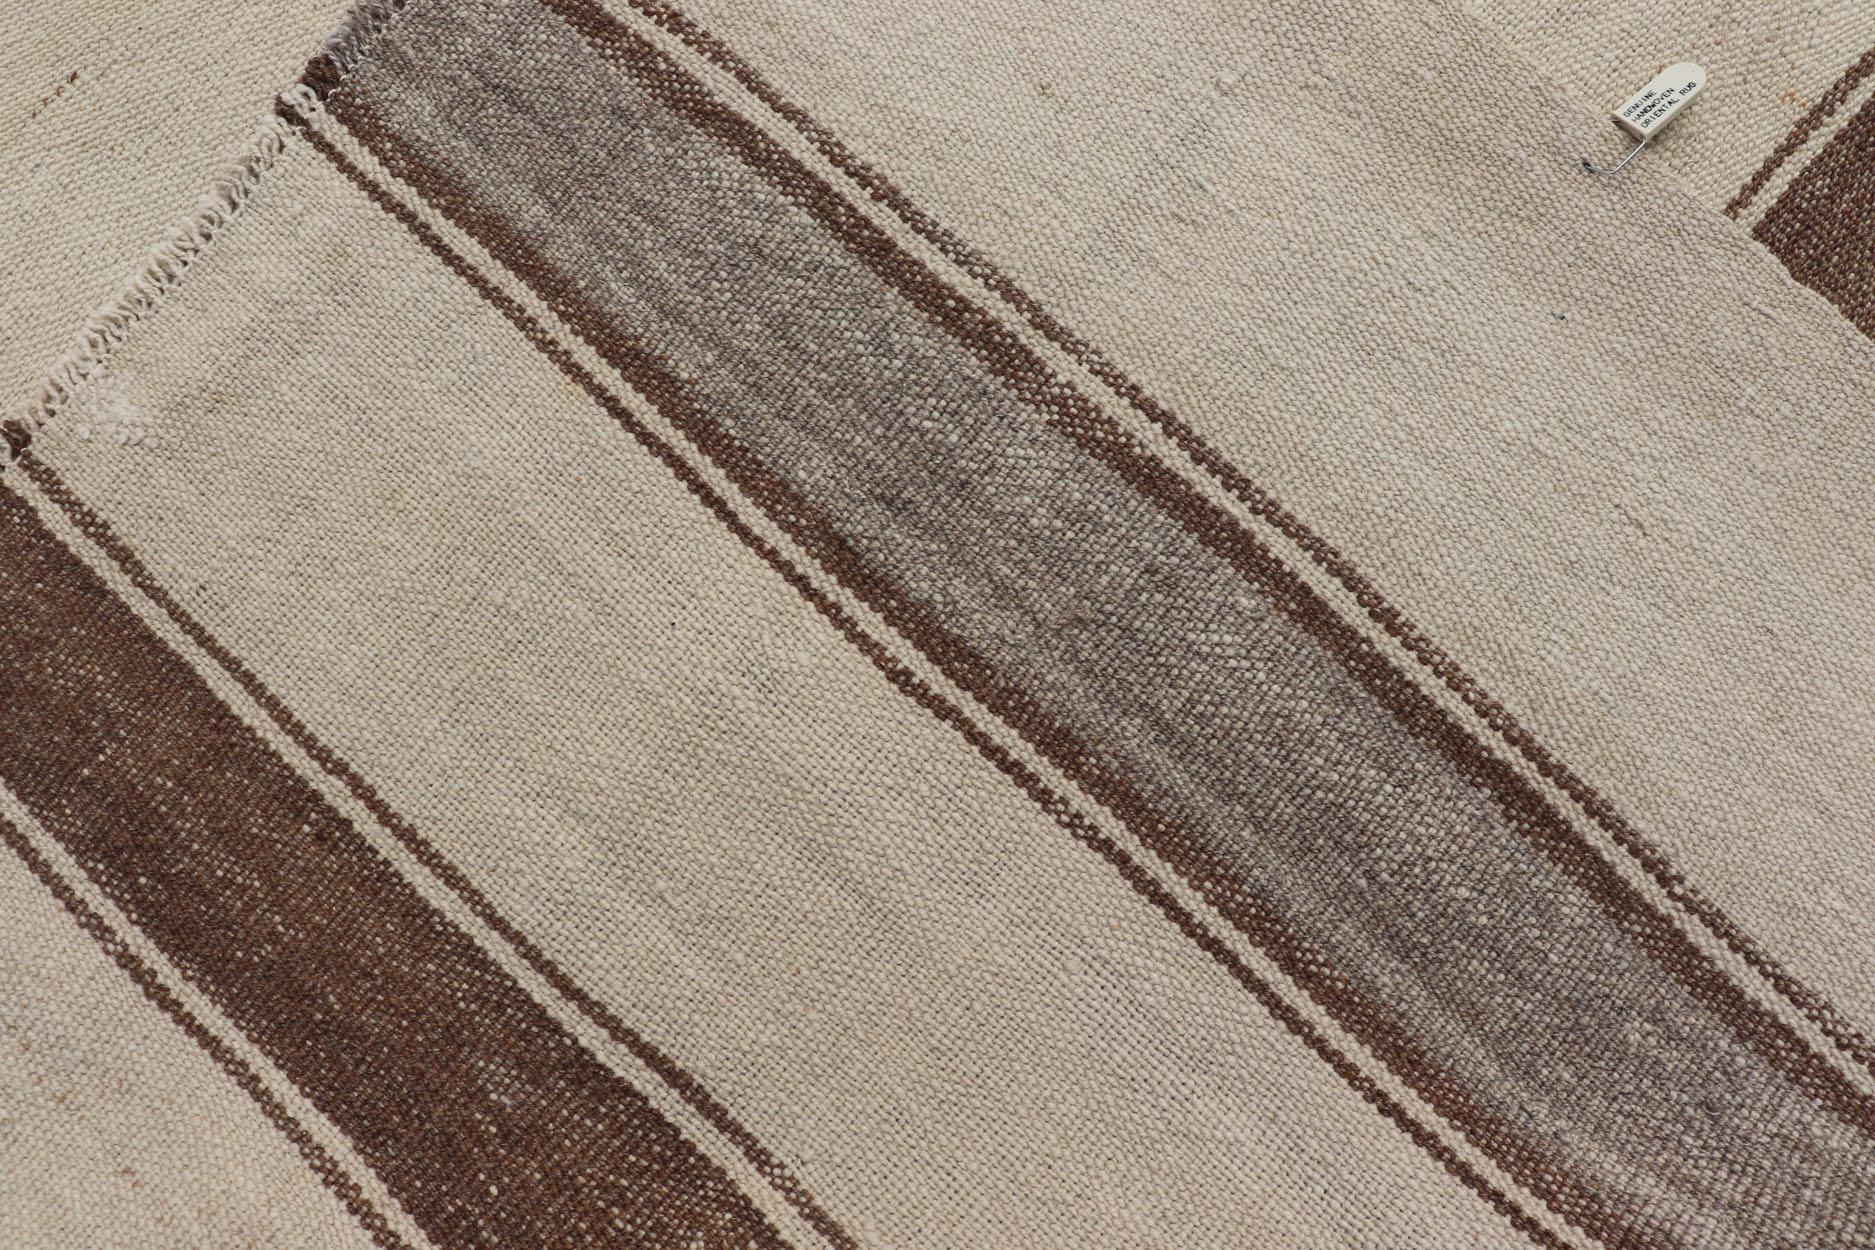 Vintage Turkish Kilim with Vertical Stripes in Tan, Taupe, Grey, Cream and Brown For Sale 5